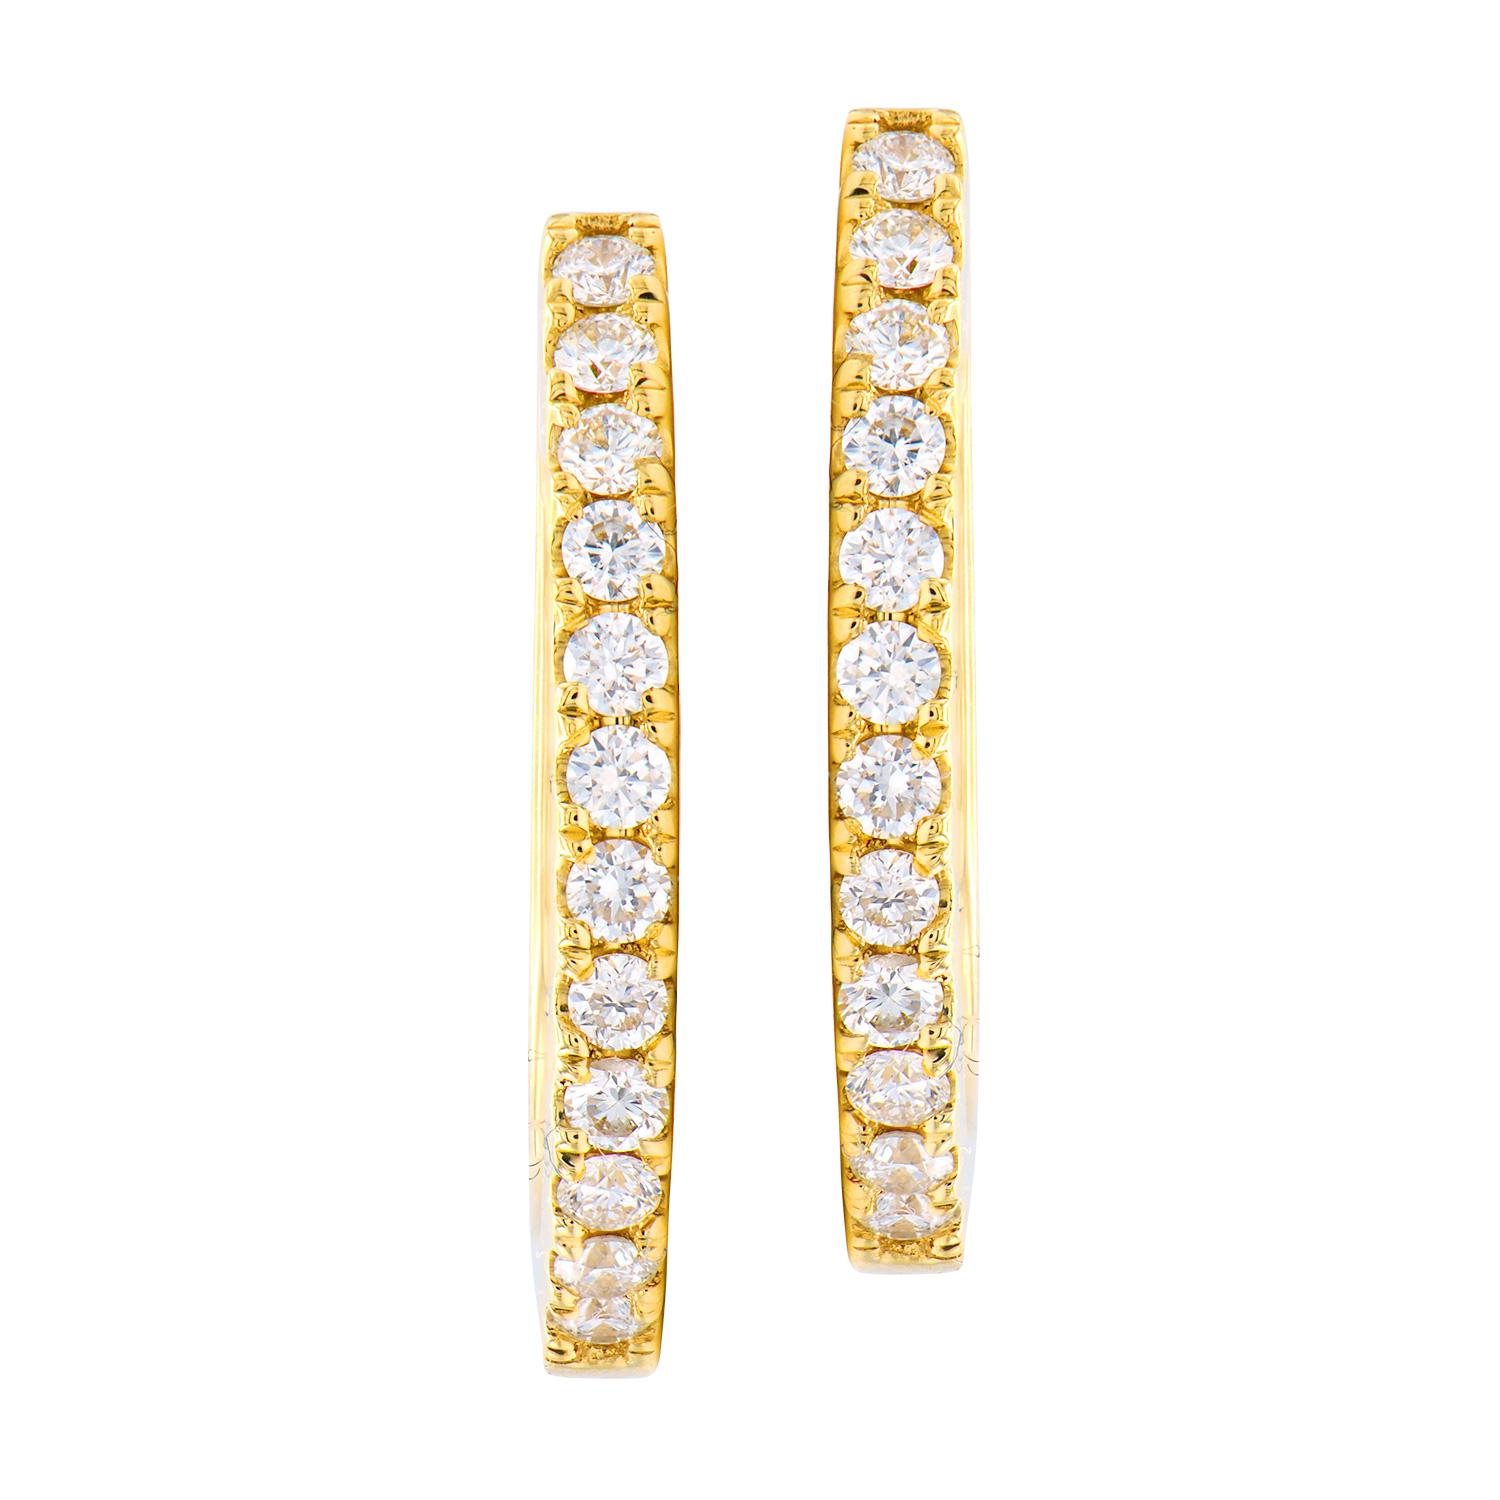 These hoops are the classic and timeless. They are made from 2.4 grams of 14 karat yellow gold with a row of diamonds on the front side. The 24 diamonds are SI, H color and total 0.26 carats. They are secured through the ear with a post that snaps